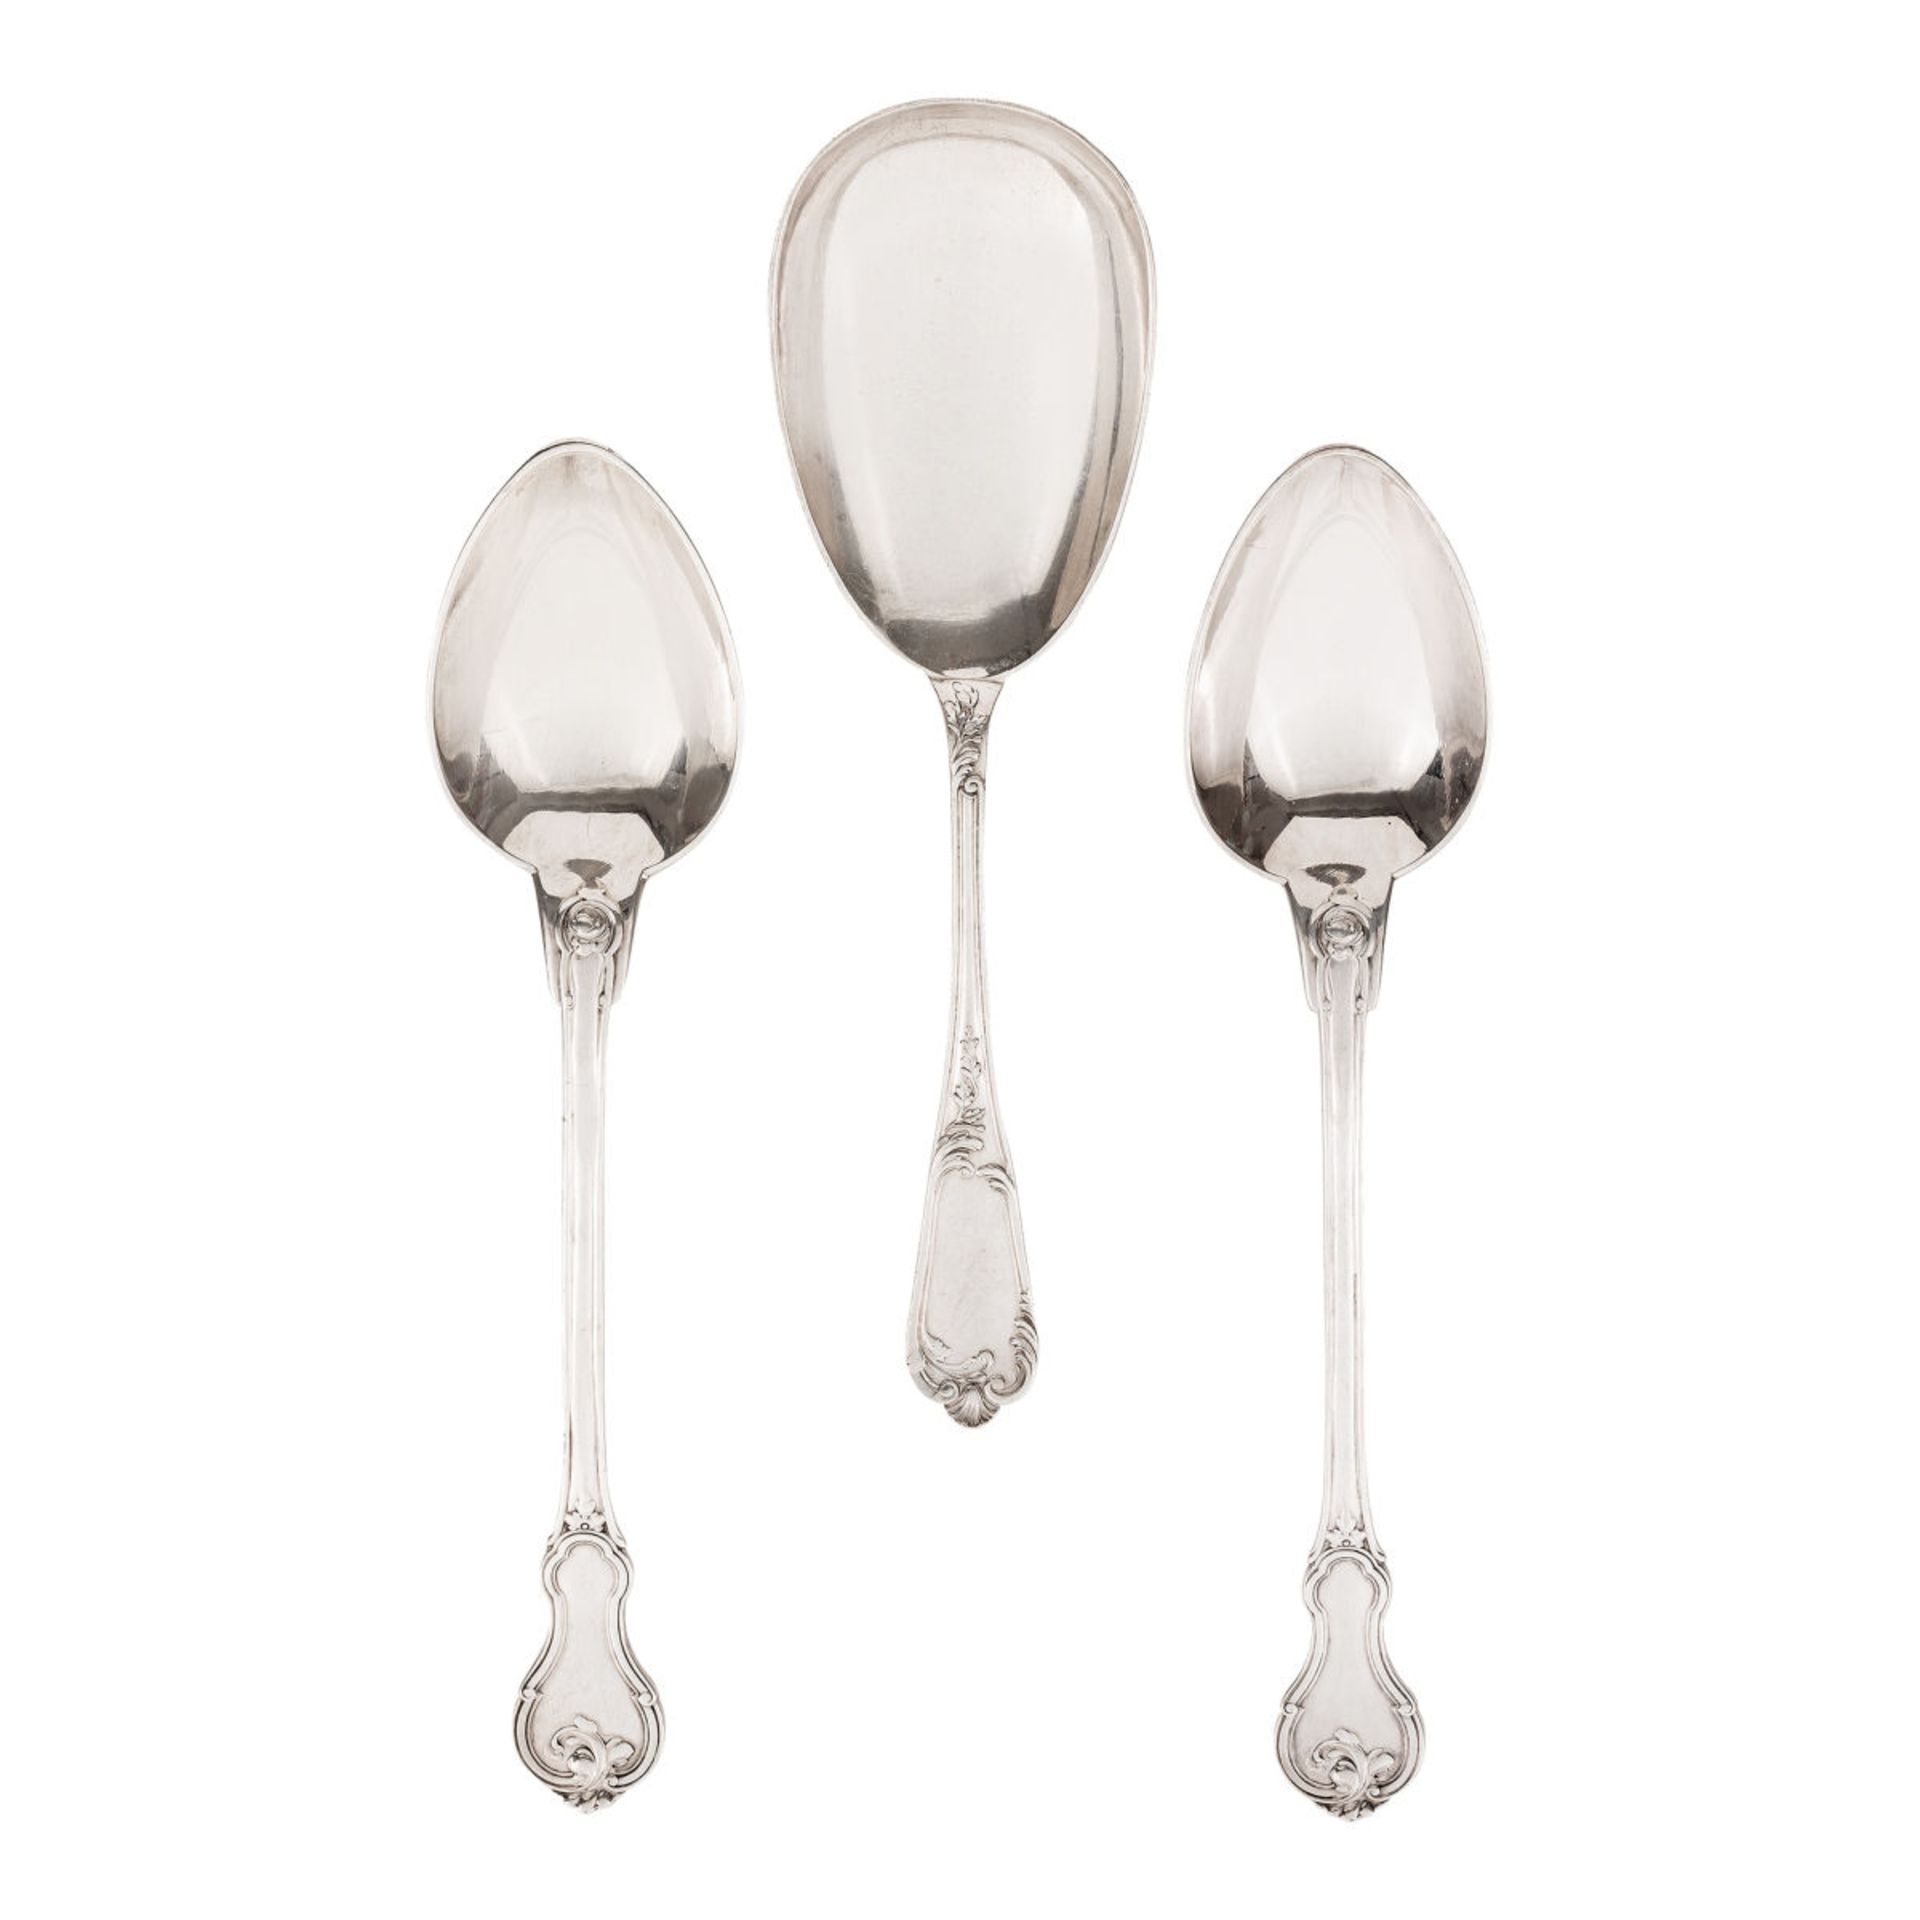 Three large serving spoons